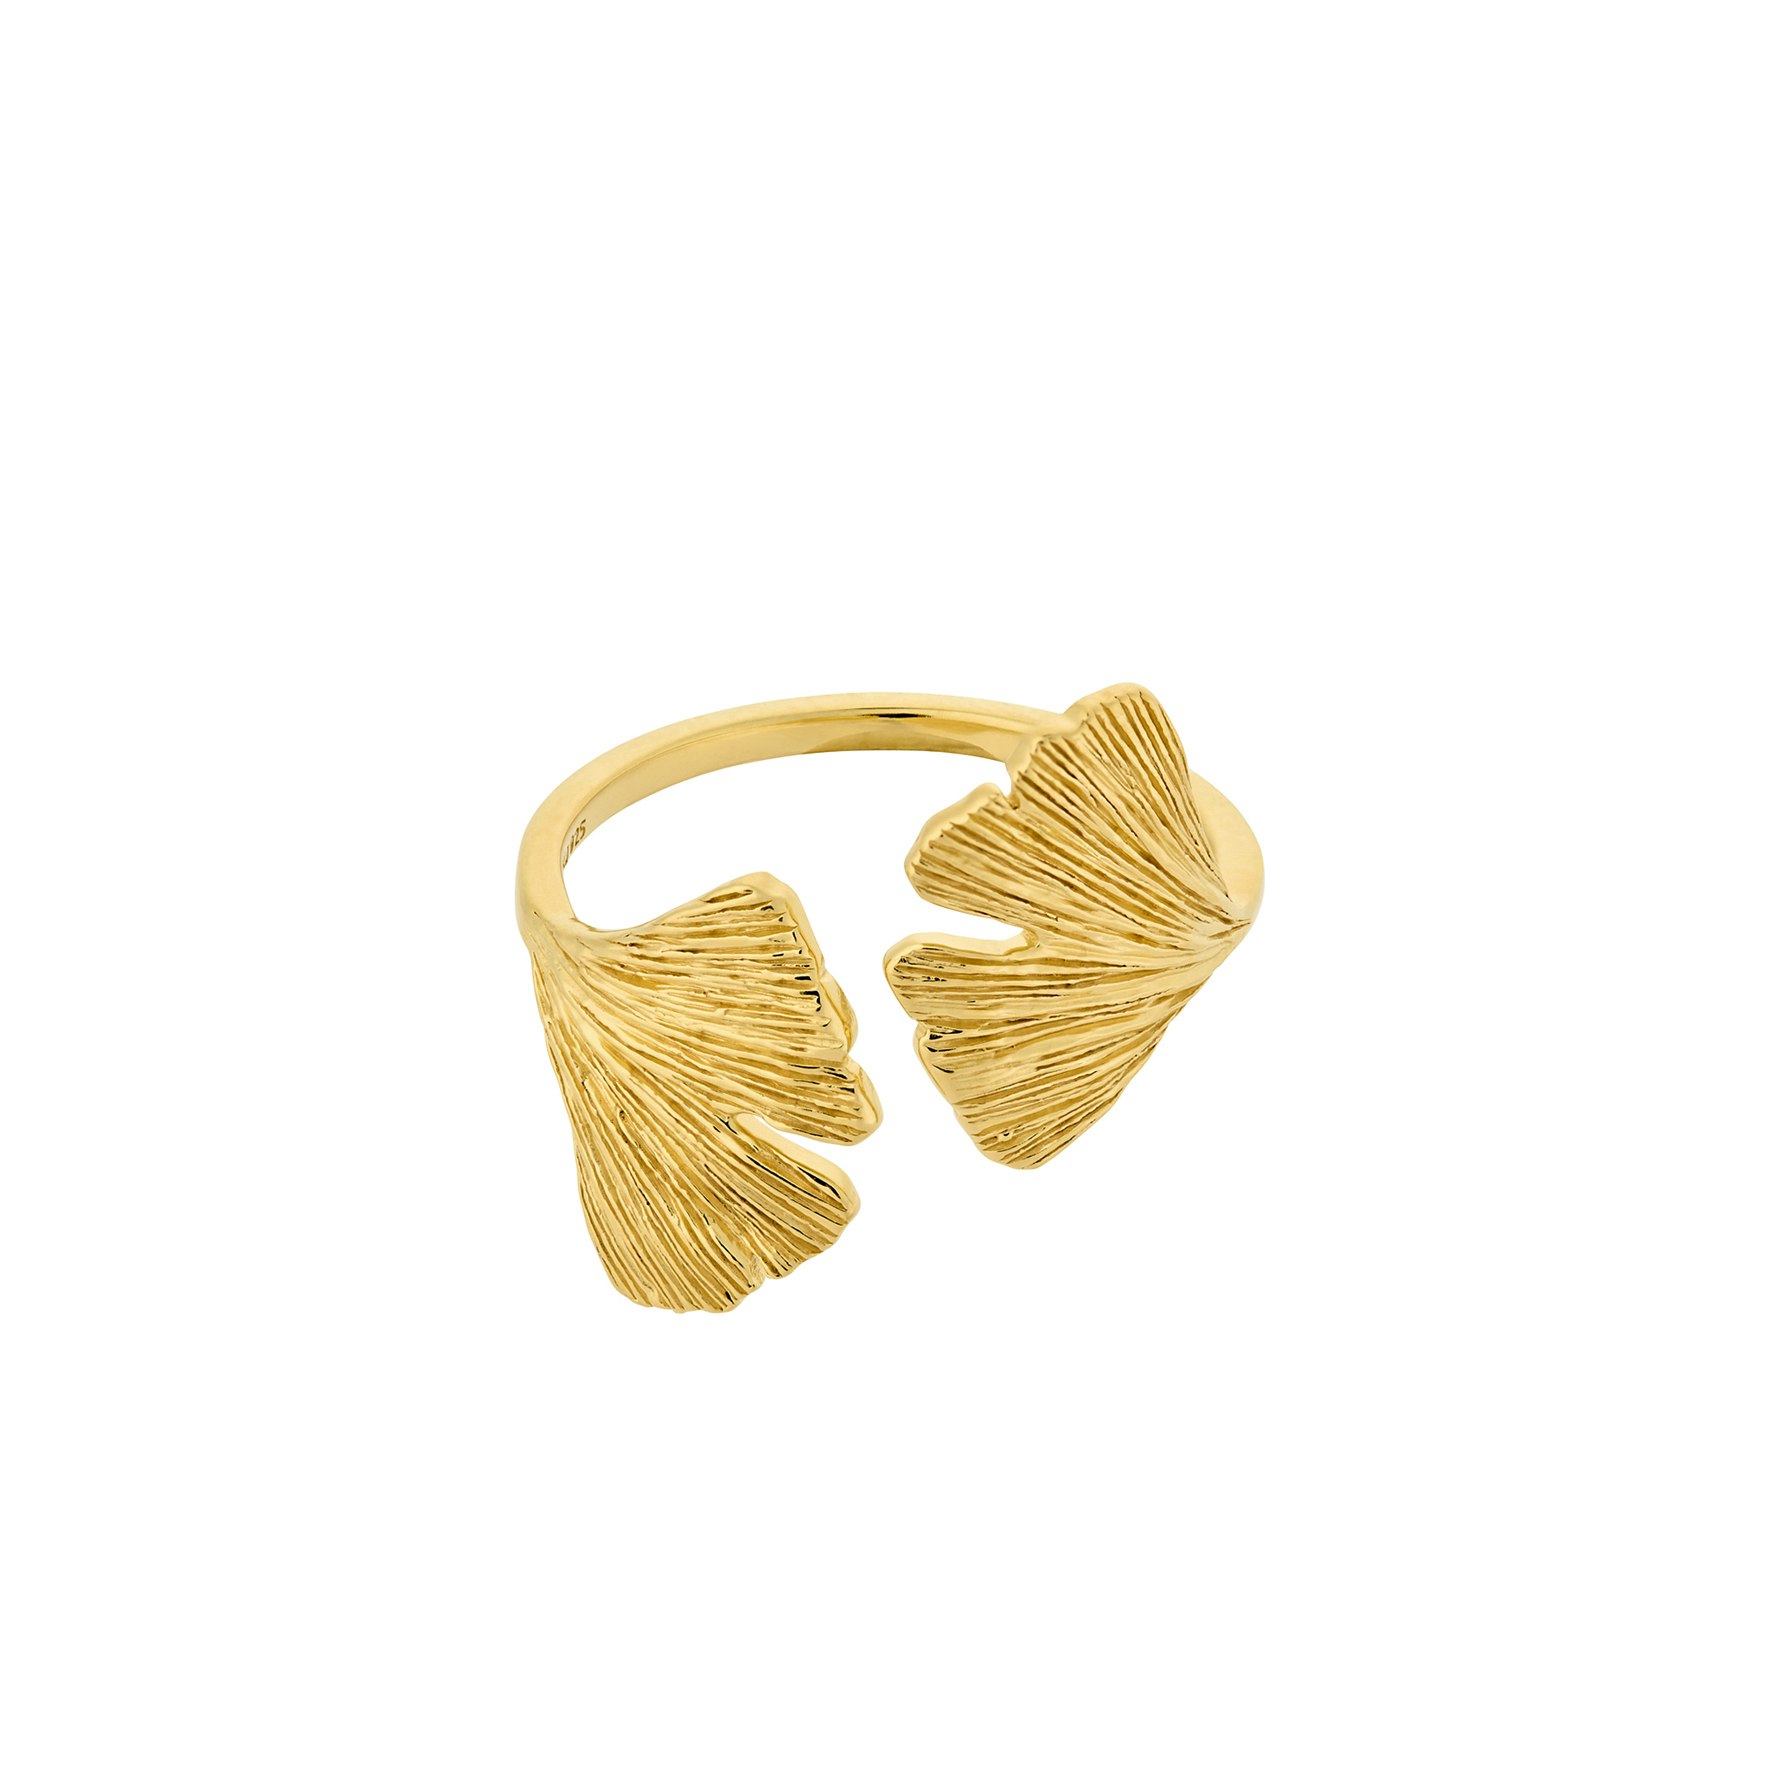 Biloba Ring from Pernille Corydon in Goldplated-Silver Sterling 925